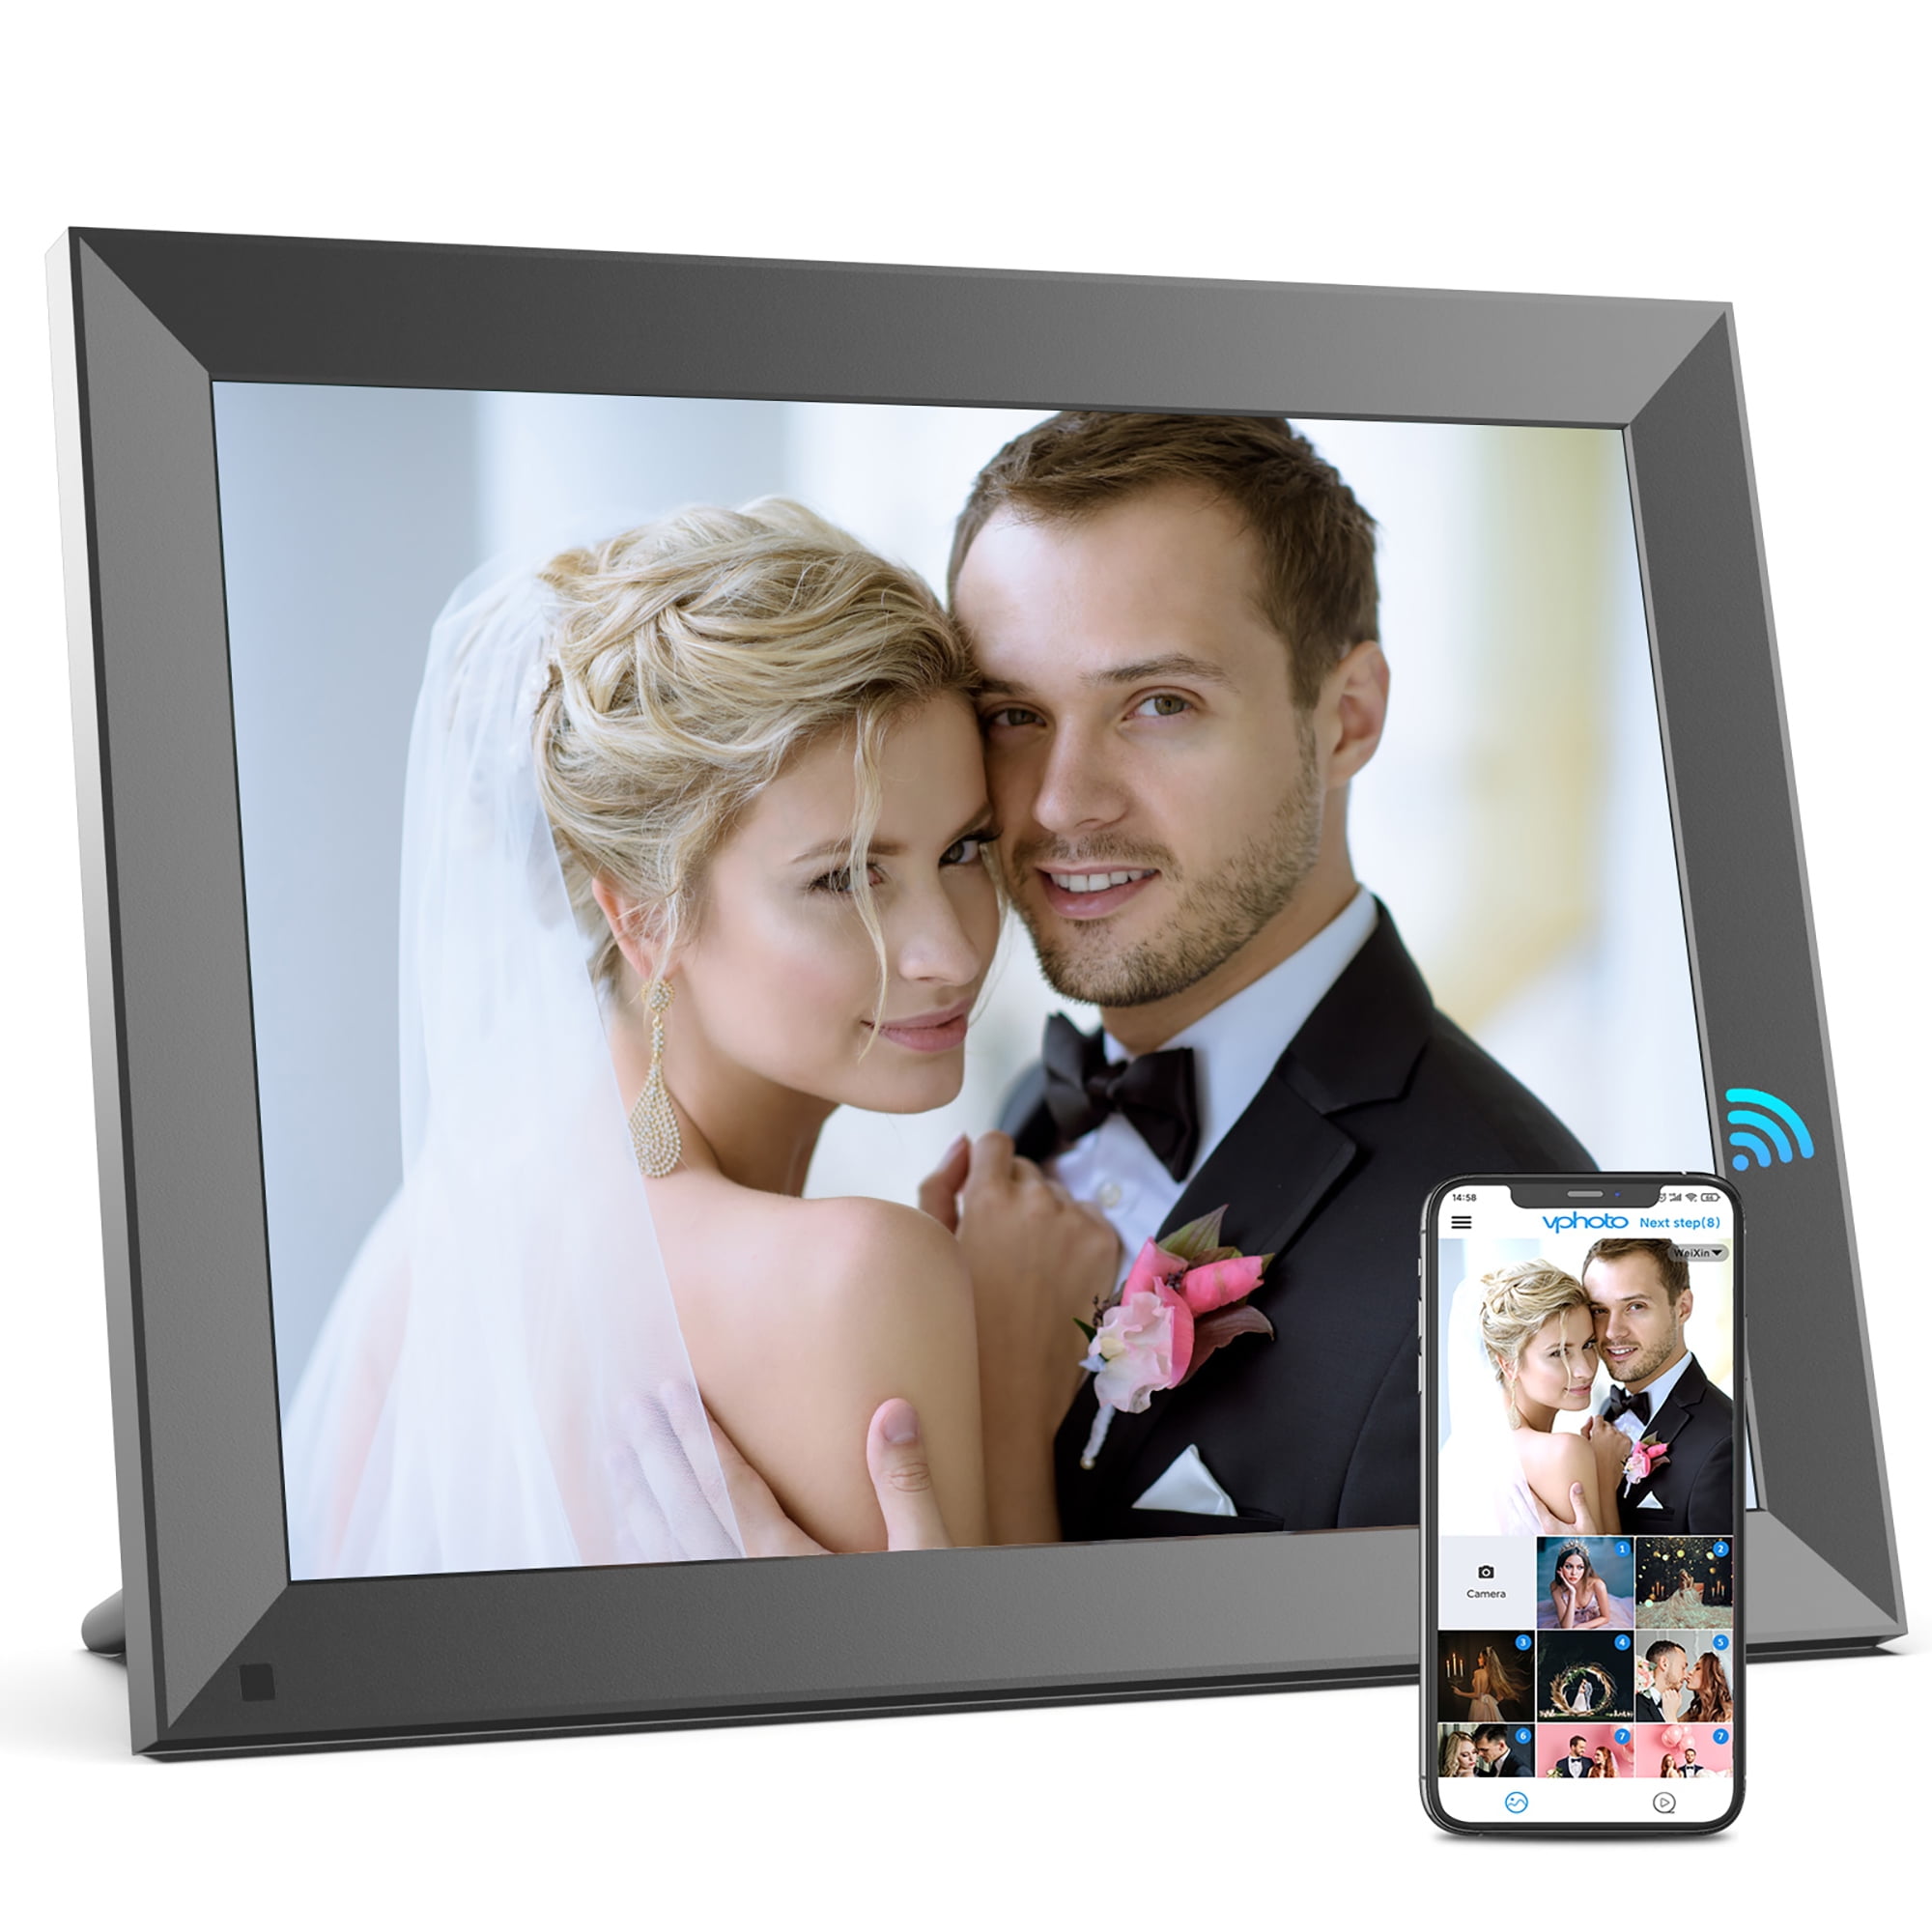 Large Digital Picture Frame Unlimited Cloud Storage Wall Mountable Sharing Photos and Videos via App/Email Instantly Fullja 17-inch 32GB Dual-WiFi Digital Photo Frame USB Motion Sensor 